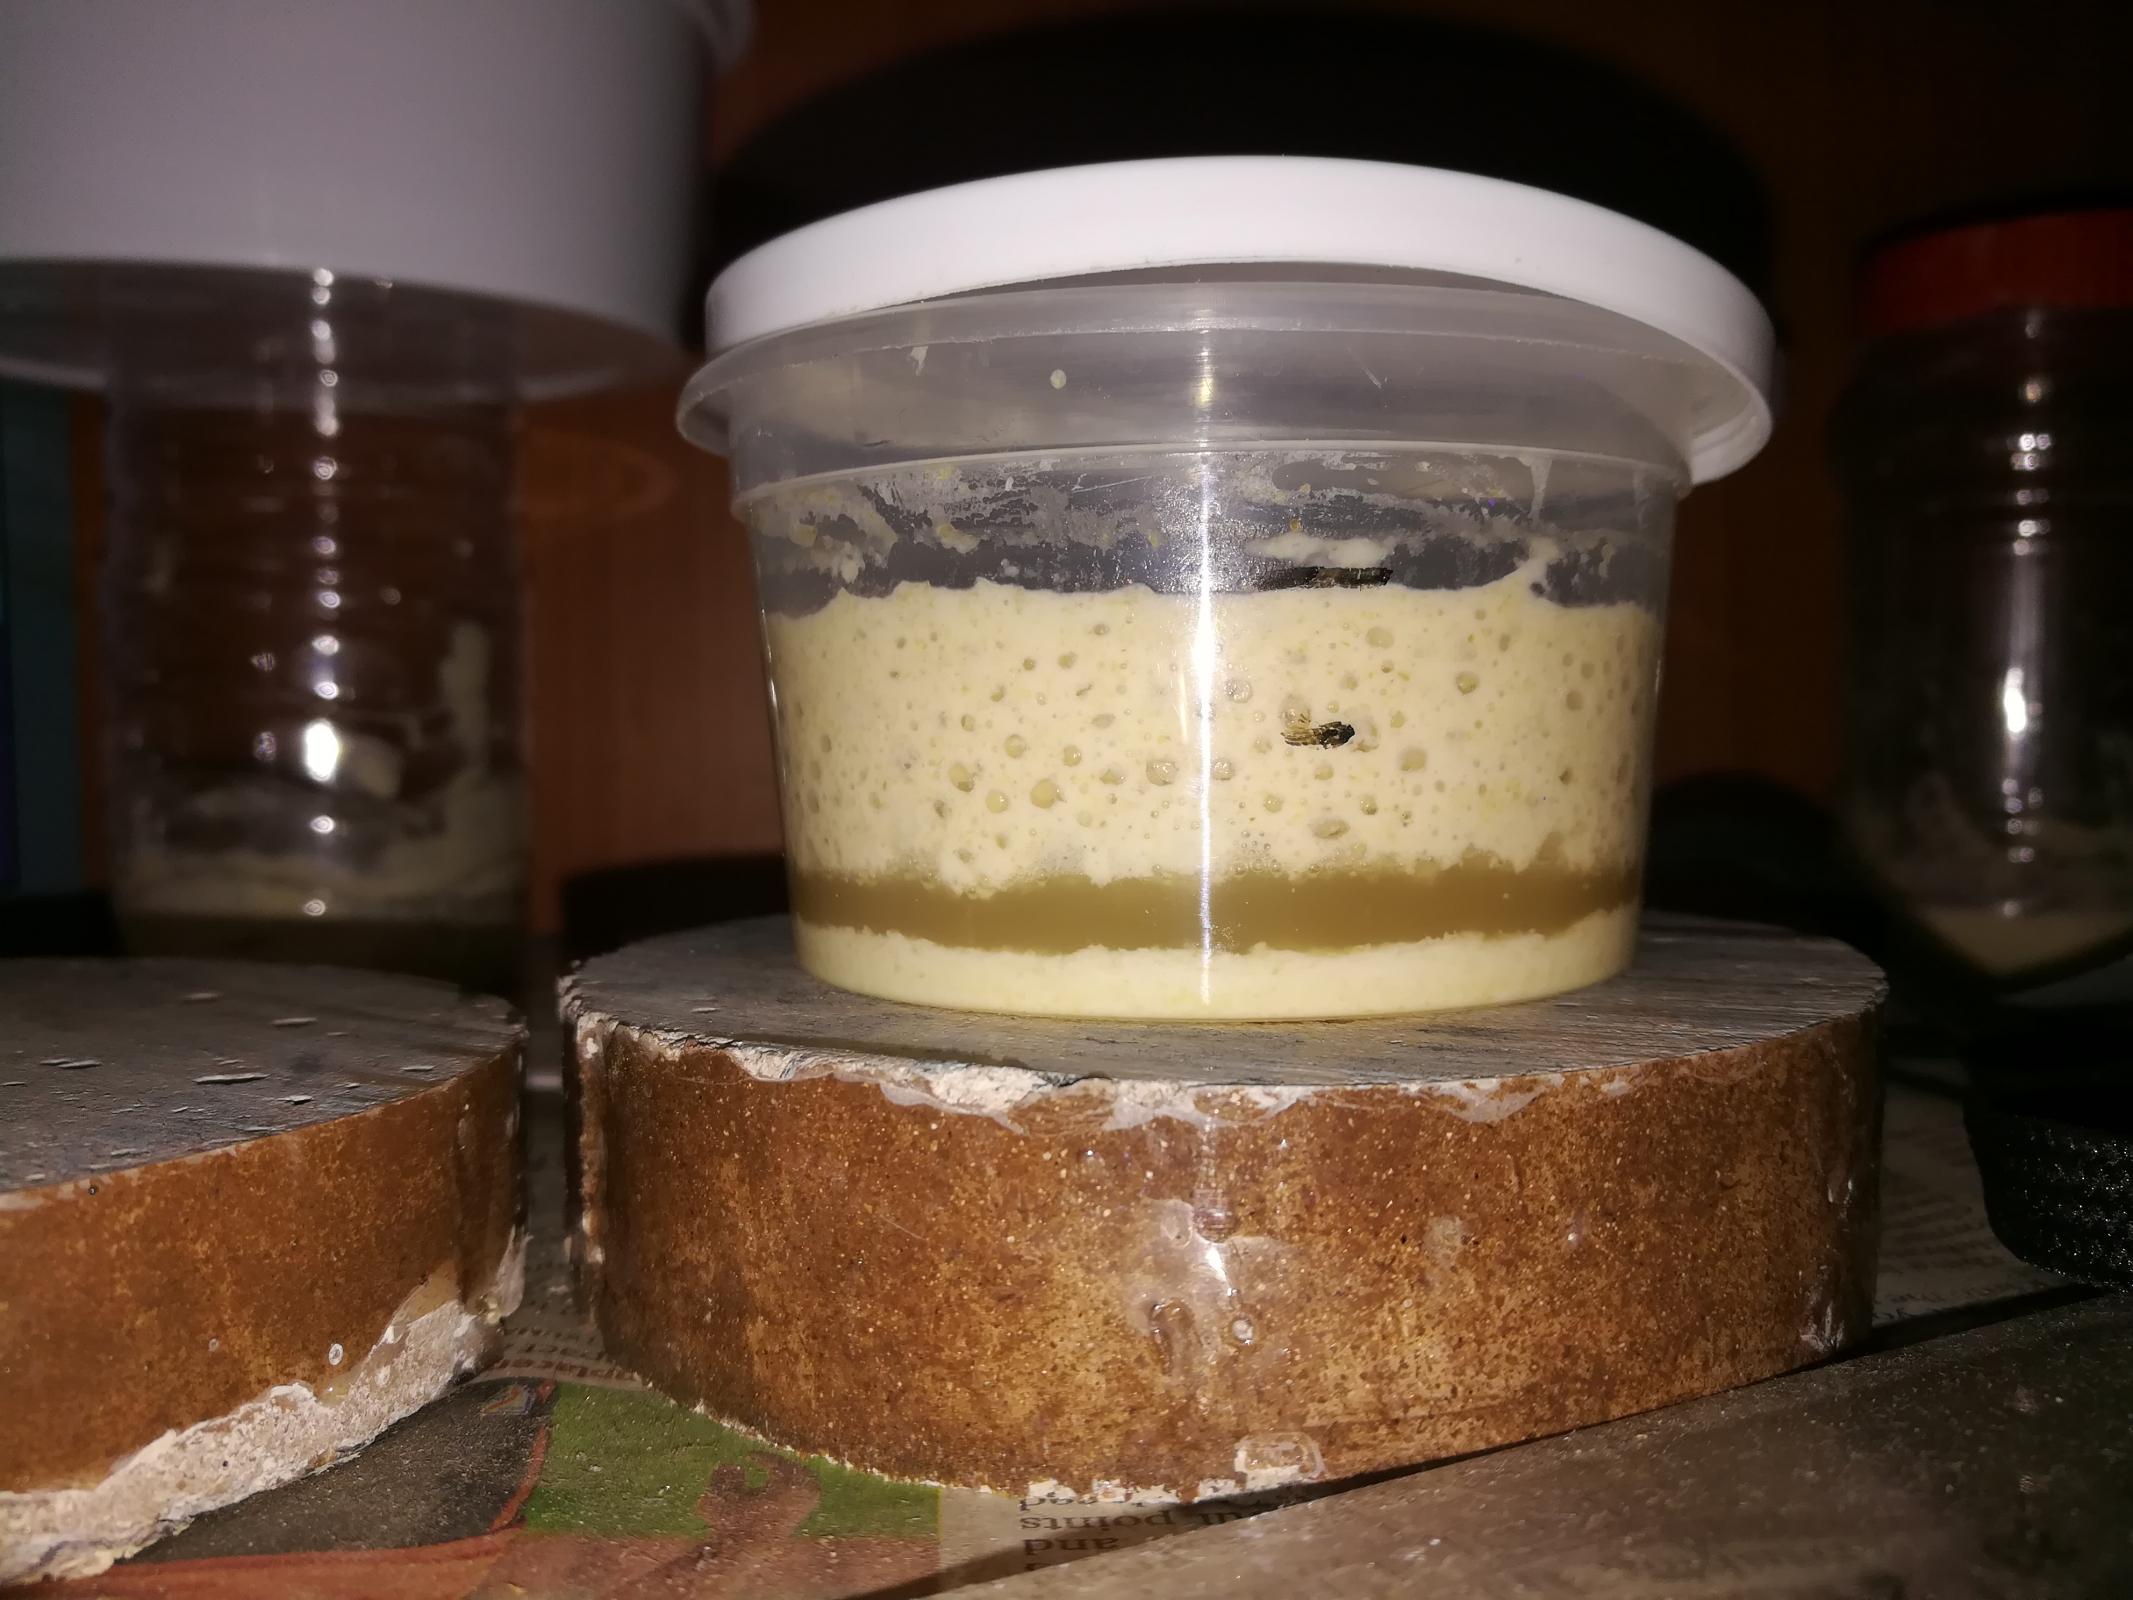 Sourdough starter on day 2 (check its image) | The Fresh Loaf